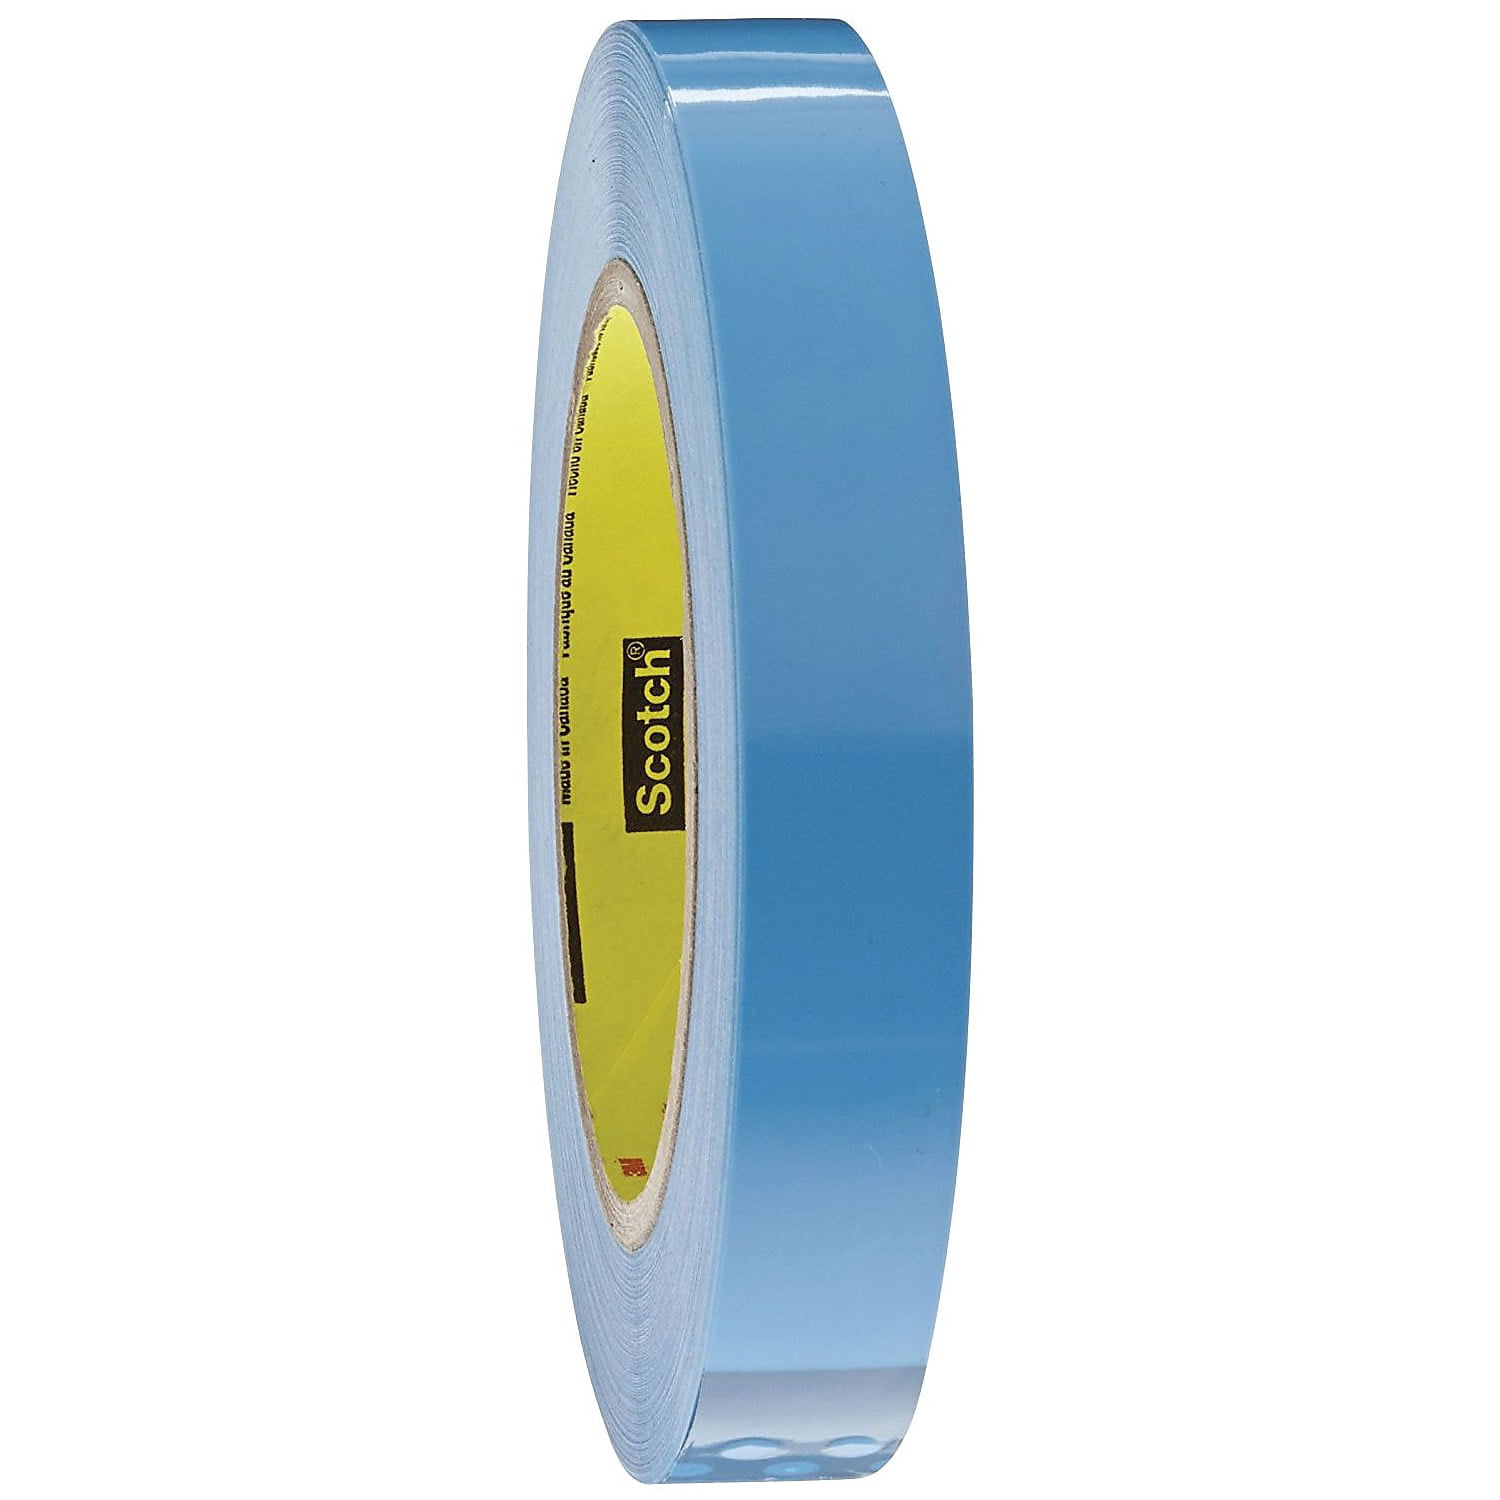 Scotch T915889612pk 1 In. X 60 Yards 8896 Strapping Tape, Blue - Pack Of 12